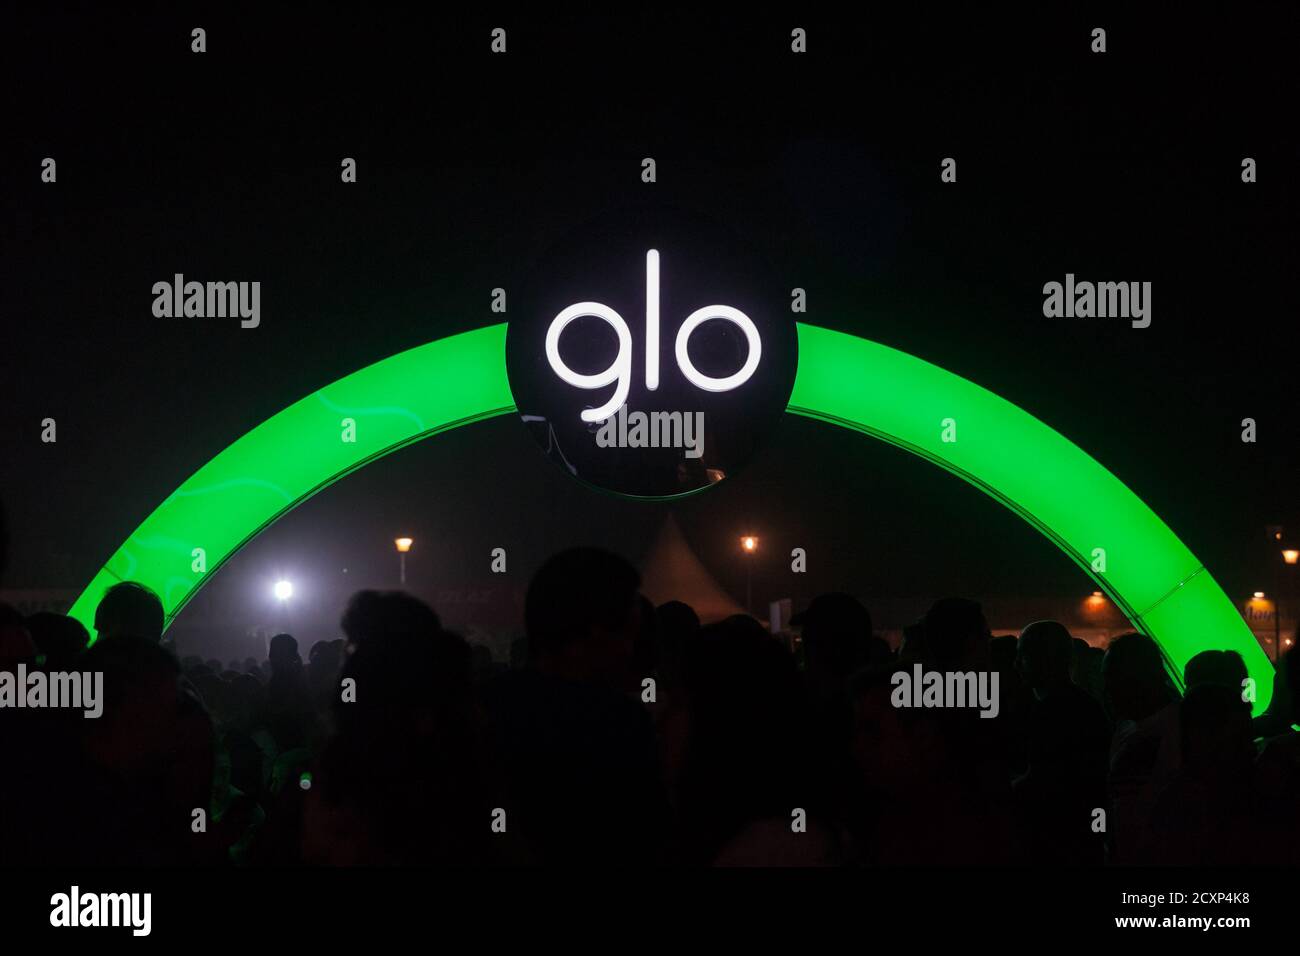 BELGRADE, SERBIA - AUGUST 17, 2019: Glo logo in front of a local retailer at night in Serbia. Glo, beloning to British American Tobacco is a tobacco h Stock Photo